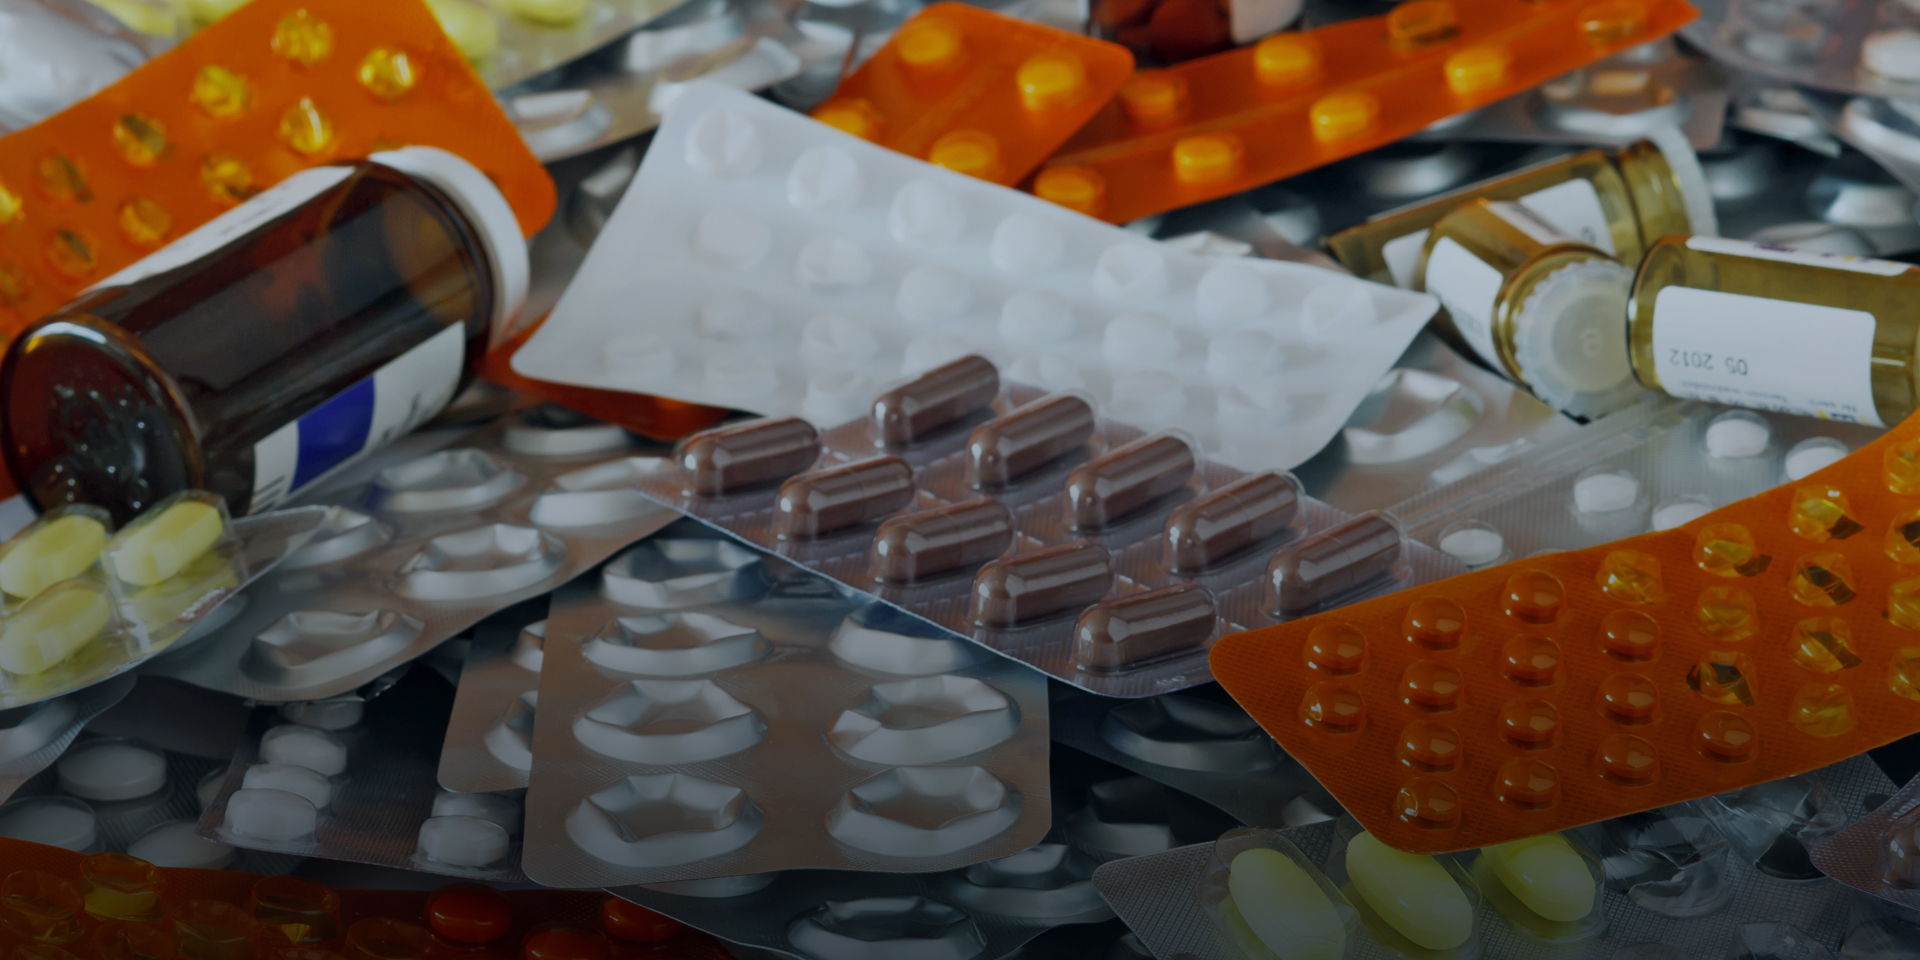 Counterfeit medicines in circulation must be destroyed sustainably to limit the danger they pose on consumers.